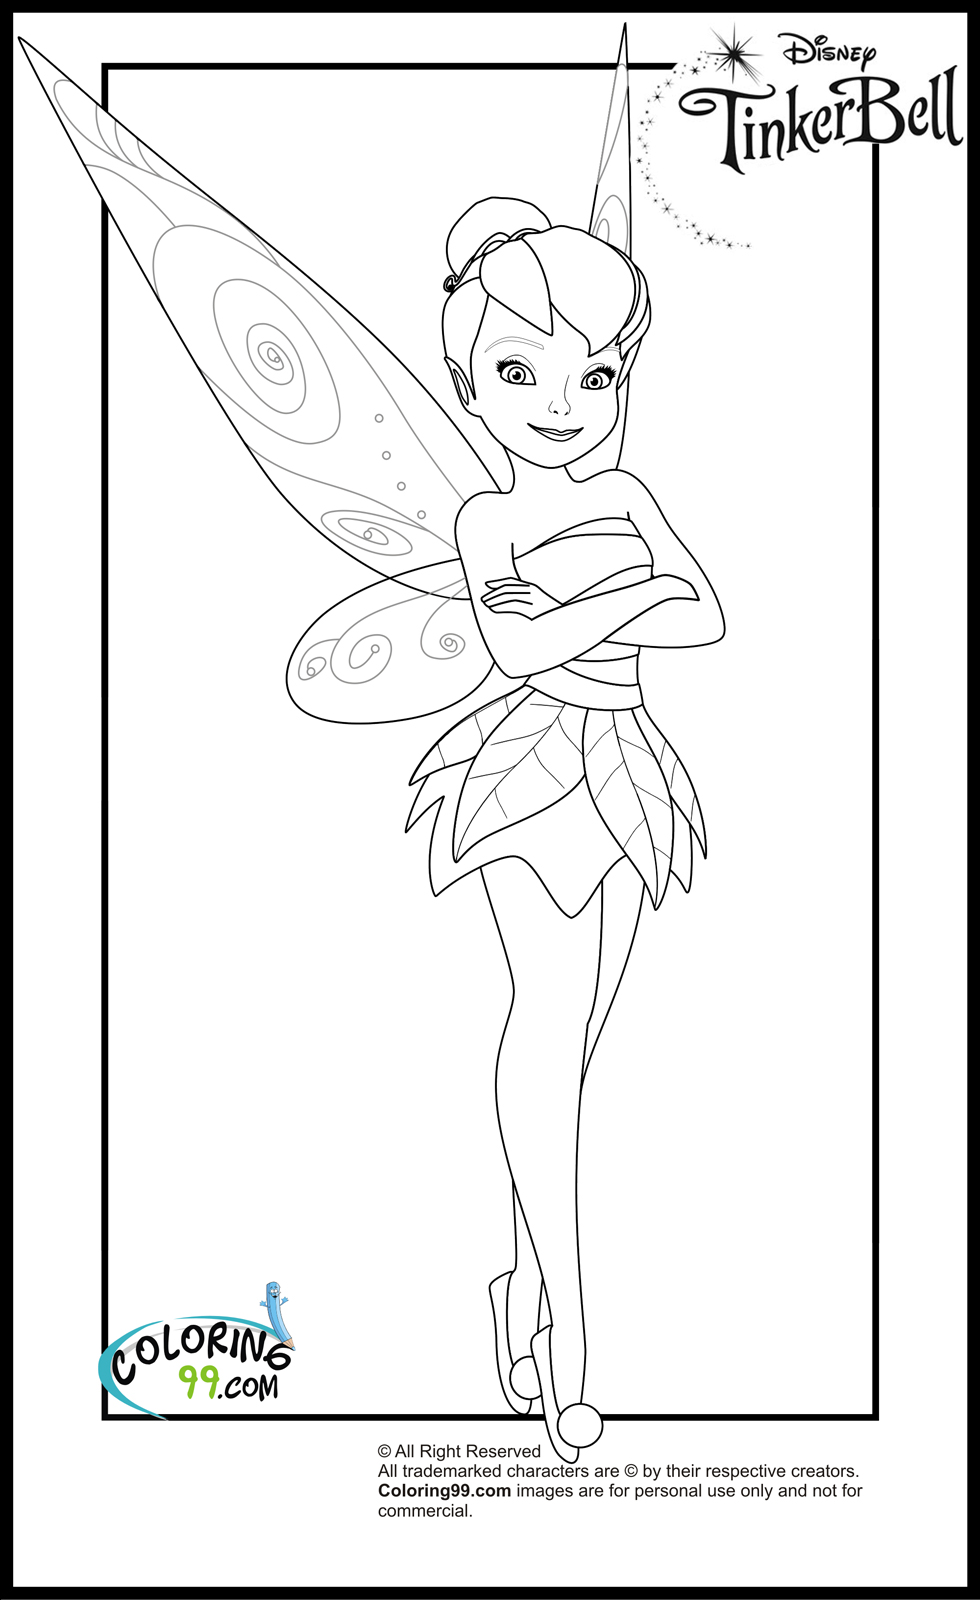 tinkerbell-coloring-pages-team-colors